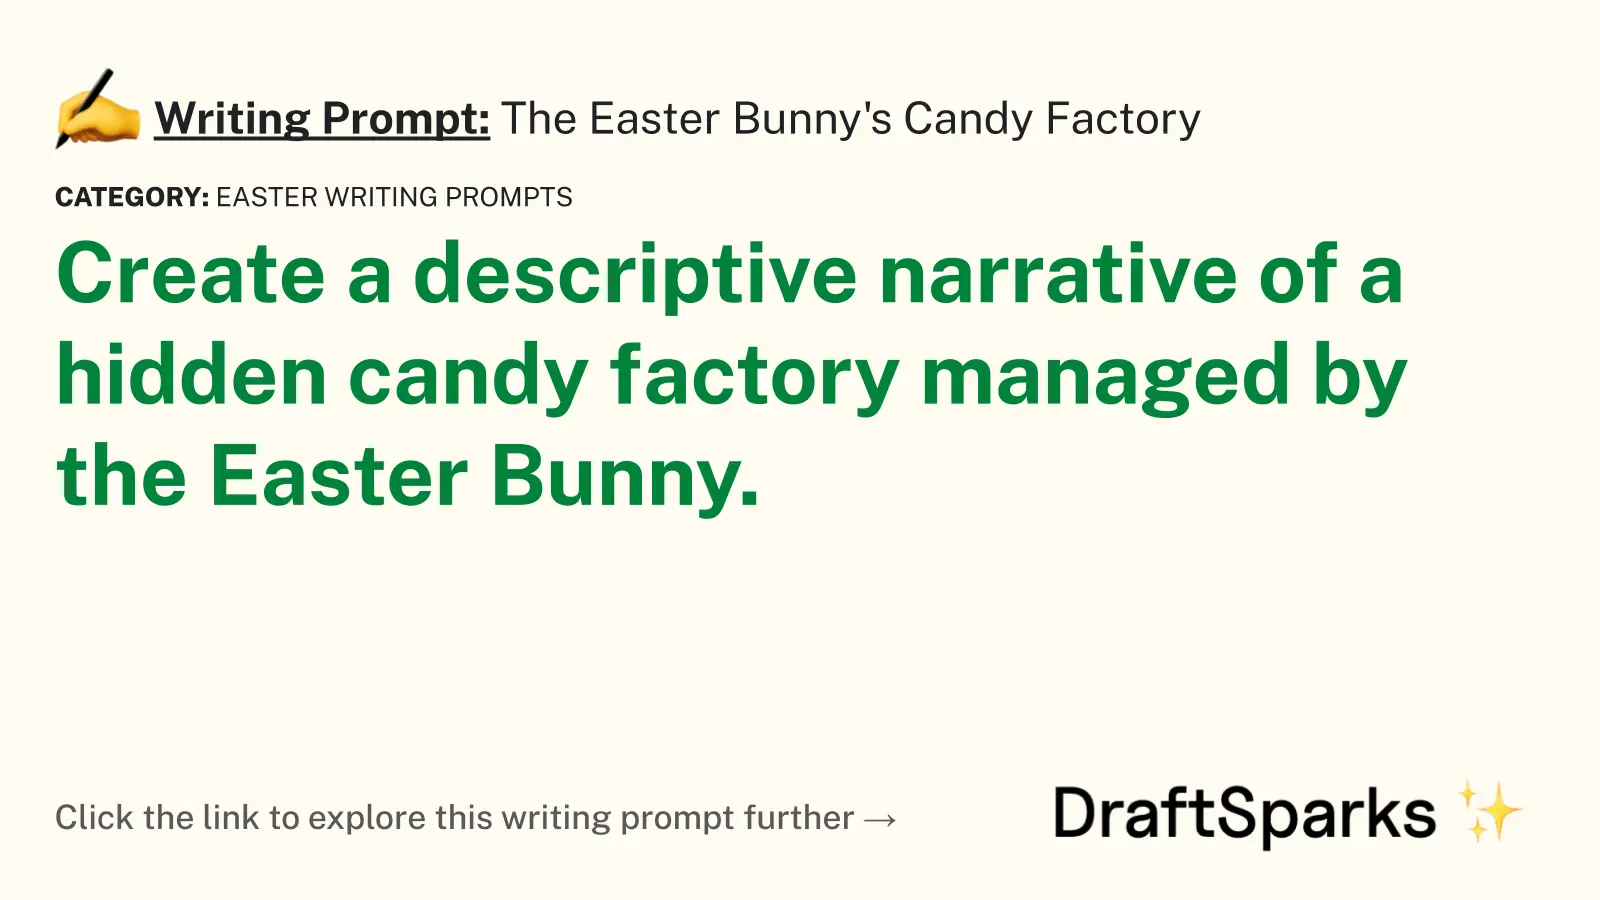 The Easter Bunny’s Candy Factory